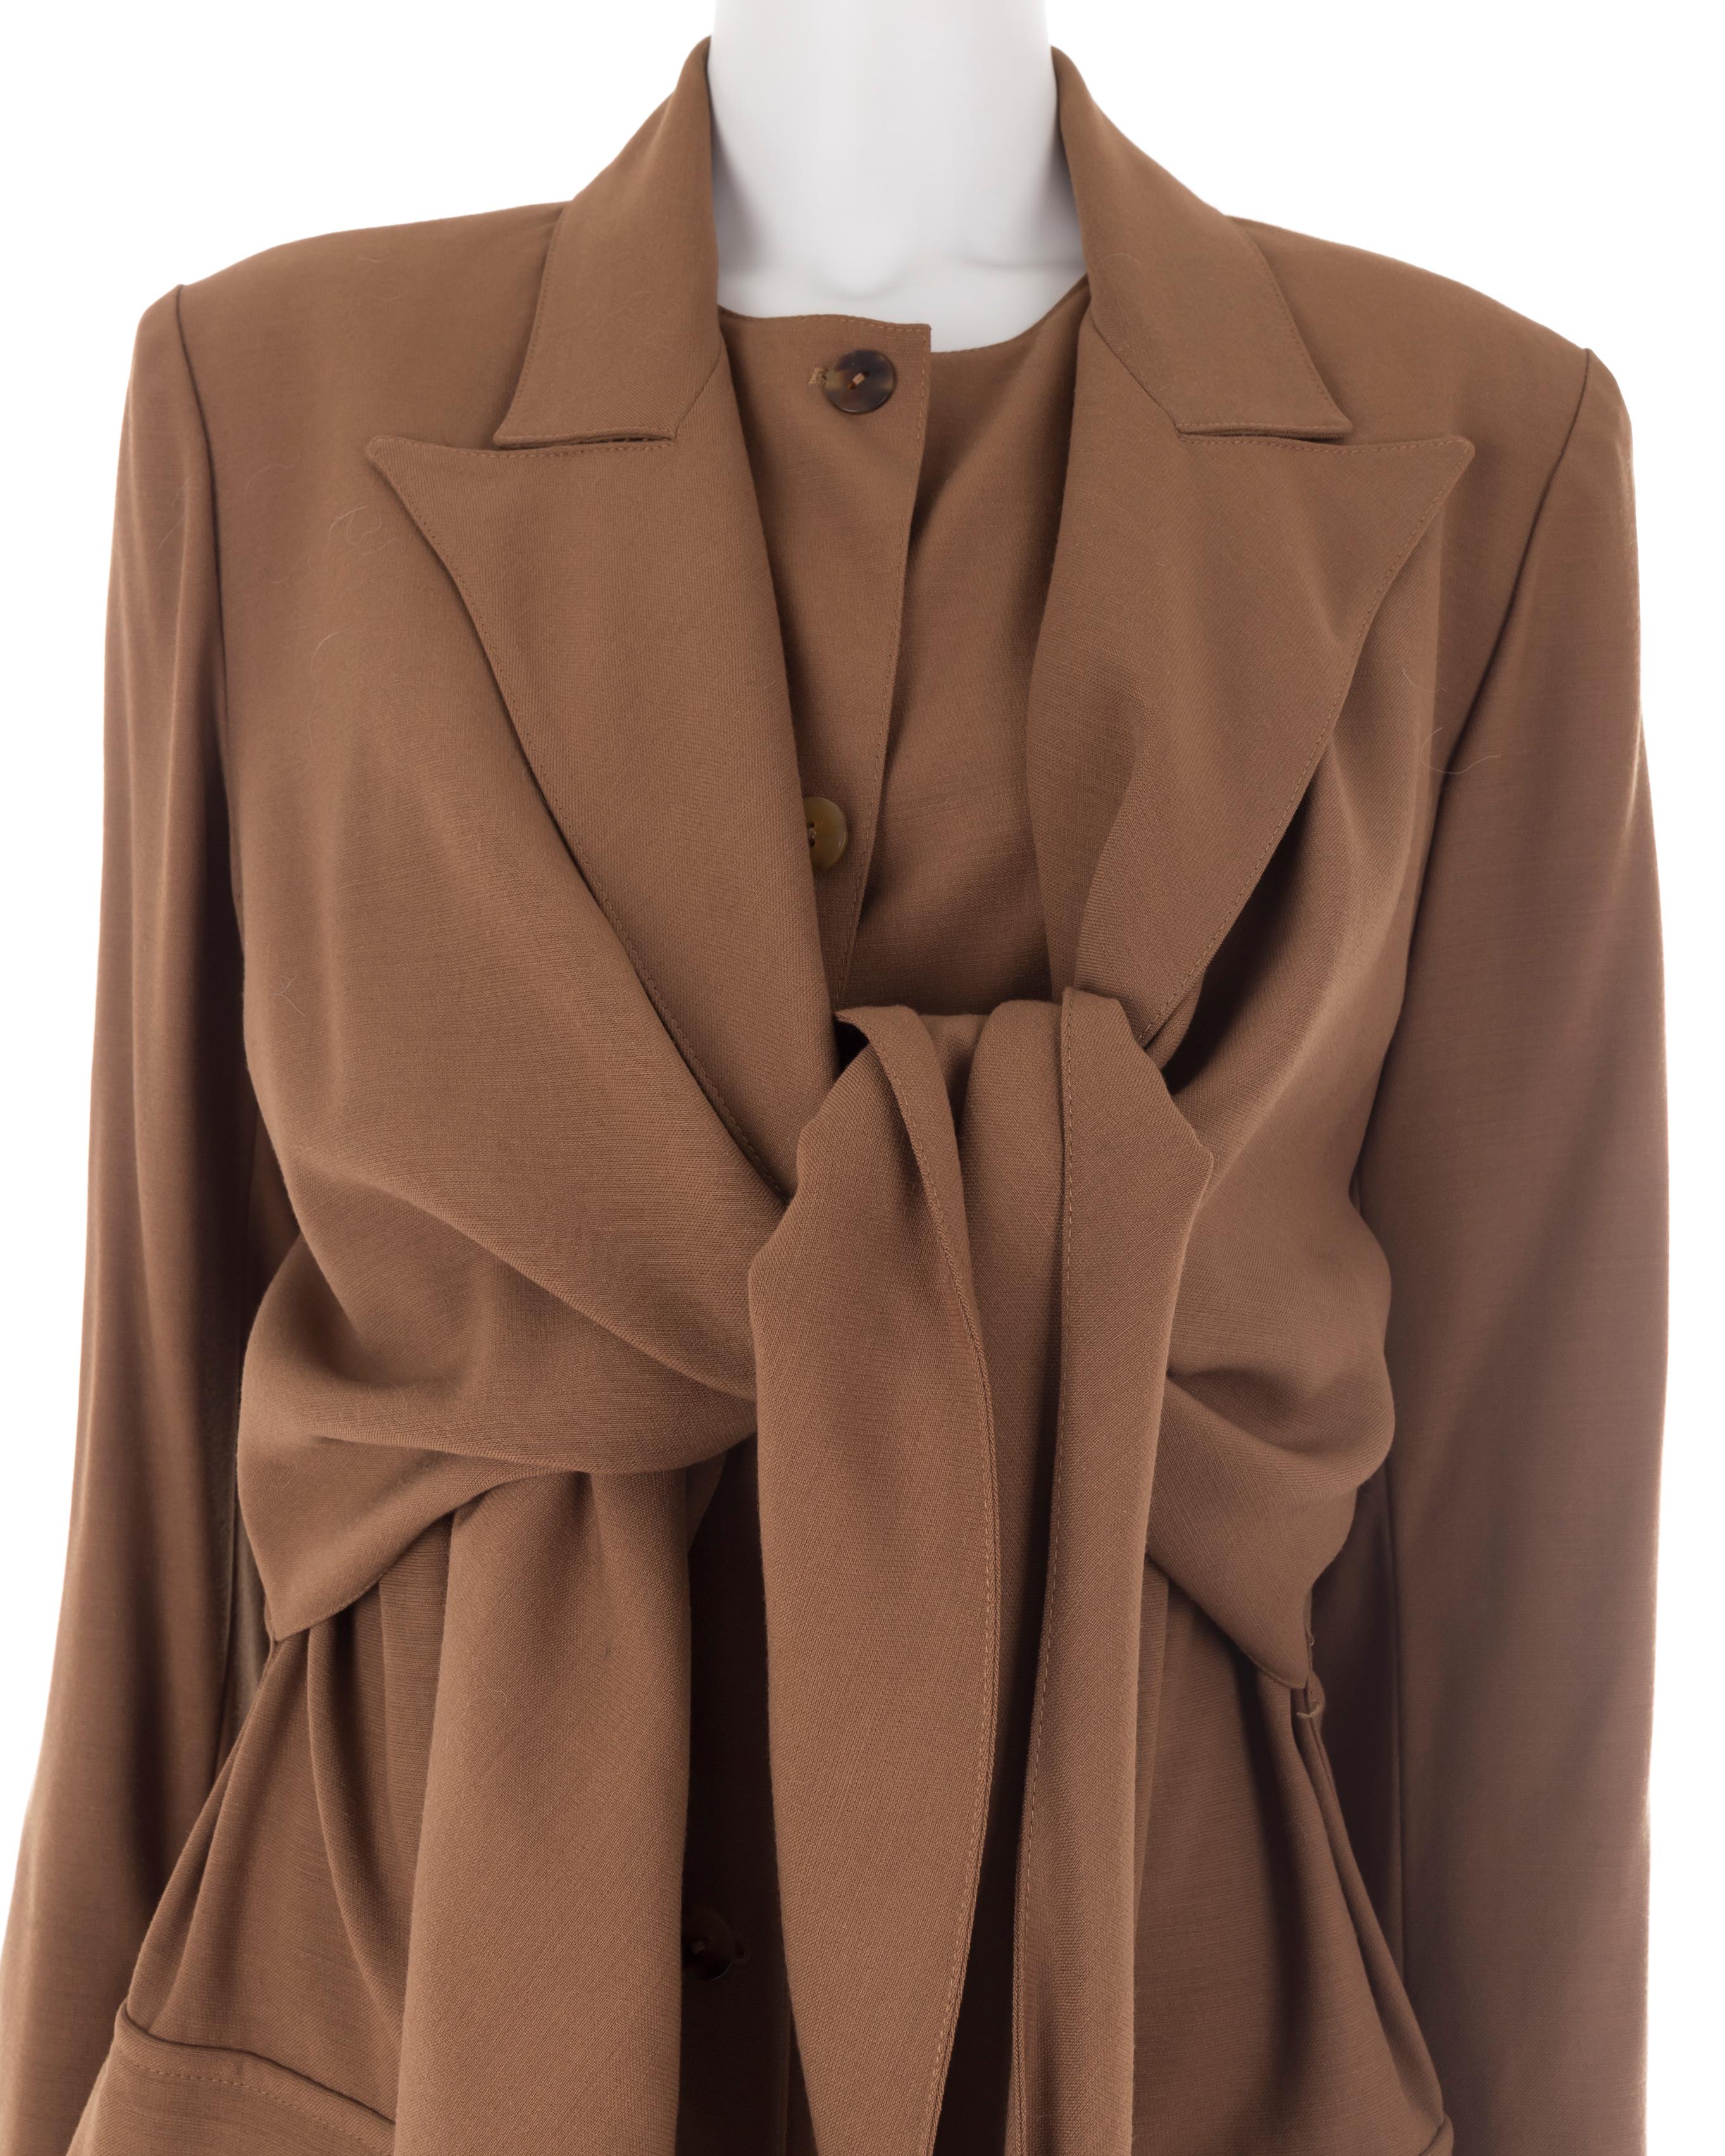 Jean Paul Gaultier F/W 1983 coffee brown layered knotted trench coat In Excellent Condition For Sale In Rome, IT